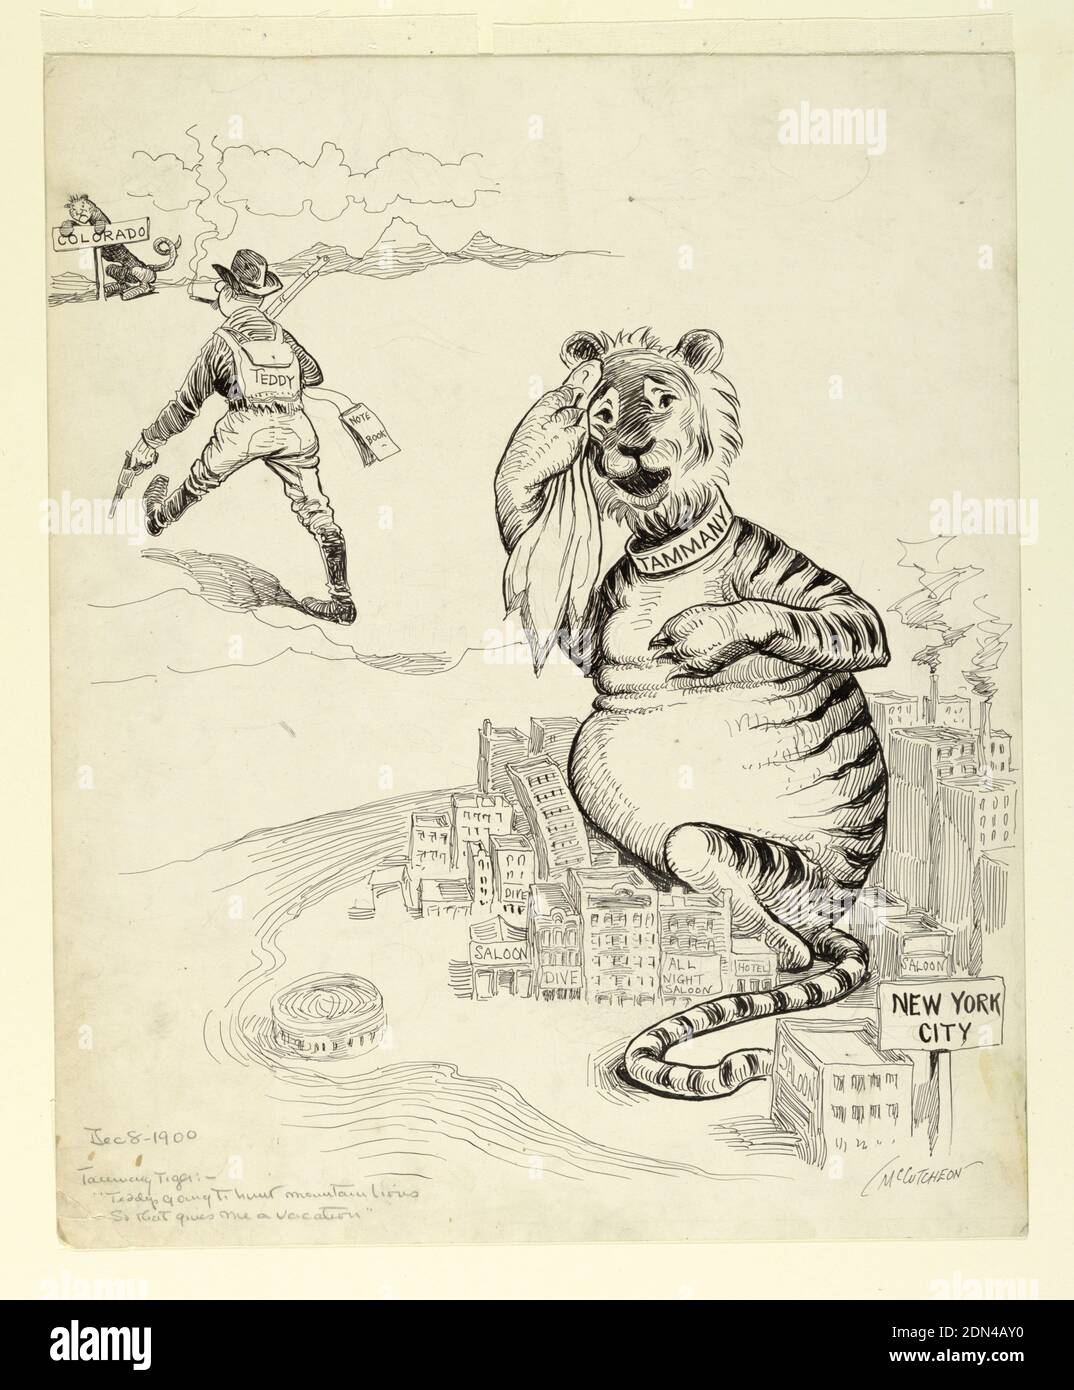 Tammany Tiger: 'Teddy's going to hunt mountain lions so that gives me a vacation', Pen and black ink, graphite on illustration board, Cartoon for The Chicago Tribune on December 8, 1900. A huge tiger wipes sweat from his brow; his collar reads Tammany, and his large belly appears to comically bend skyscrapers in New York City. Teddy Roosevelt is seen in the upper left, heading to Colorado on a hunting trip with guns in hand., USA, 1900, figures, Drawing Stock Photo